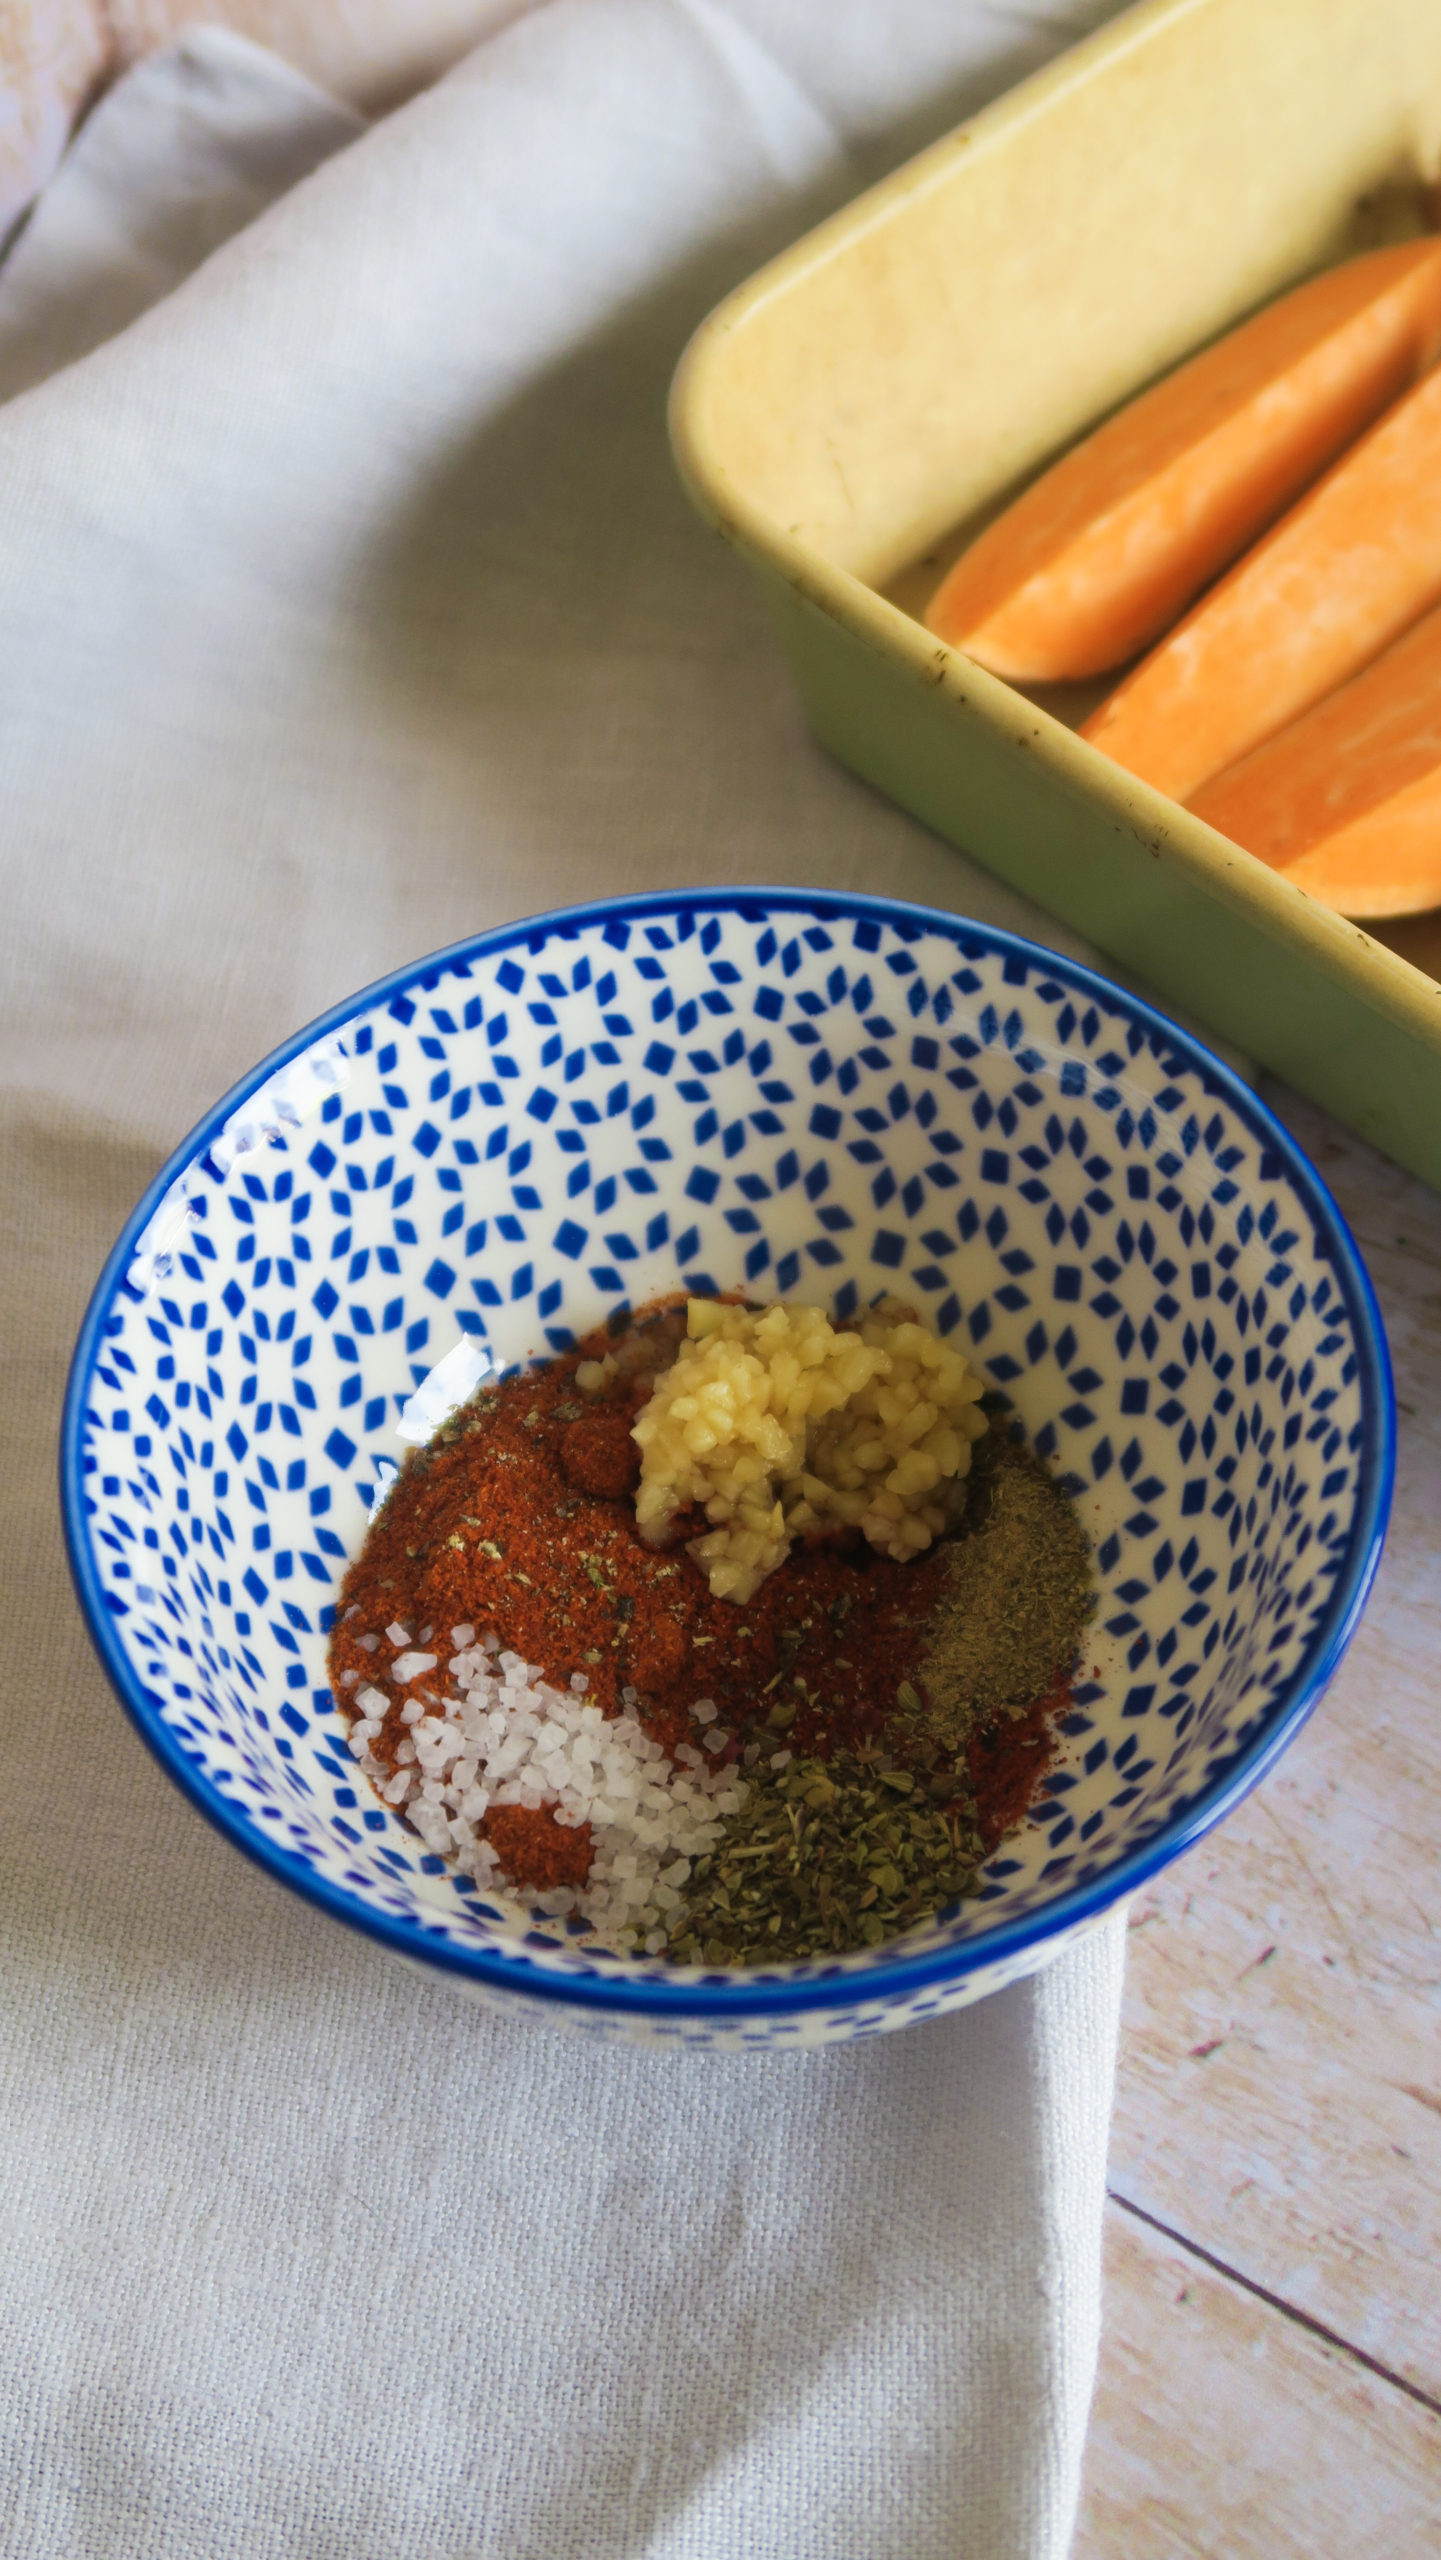 Ground spices in a blue morrocan style bowl 